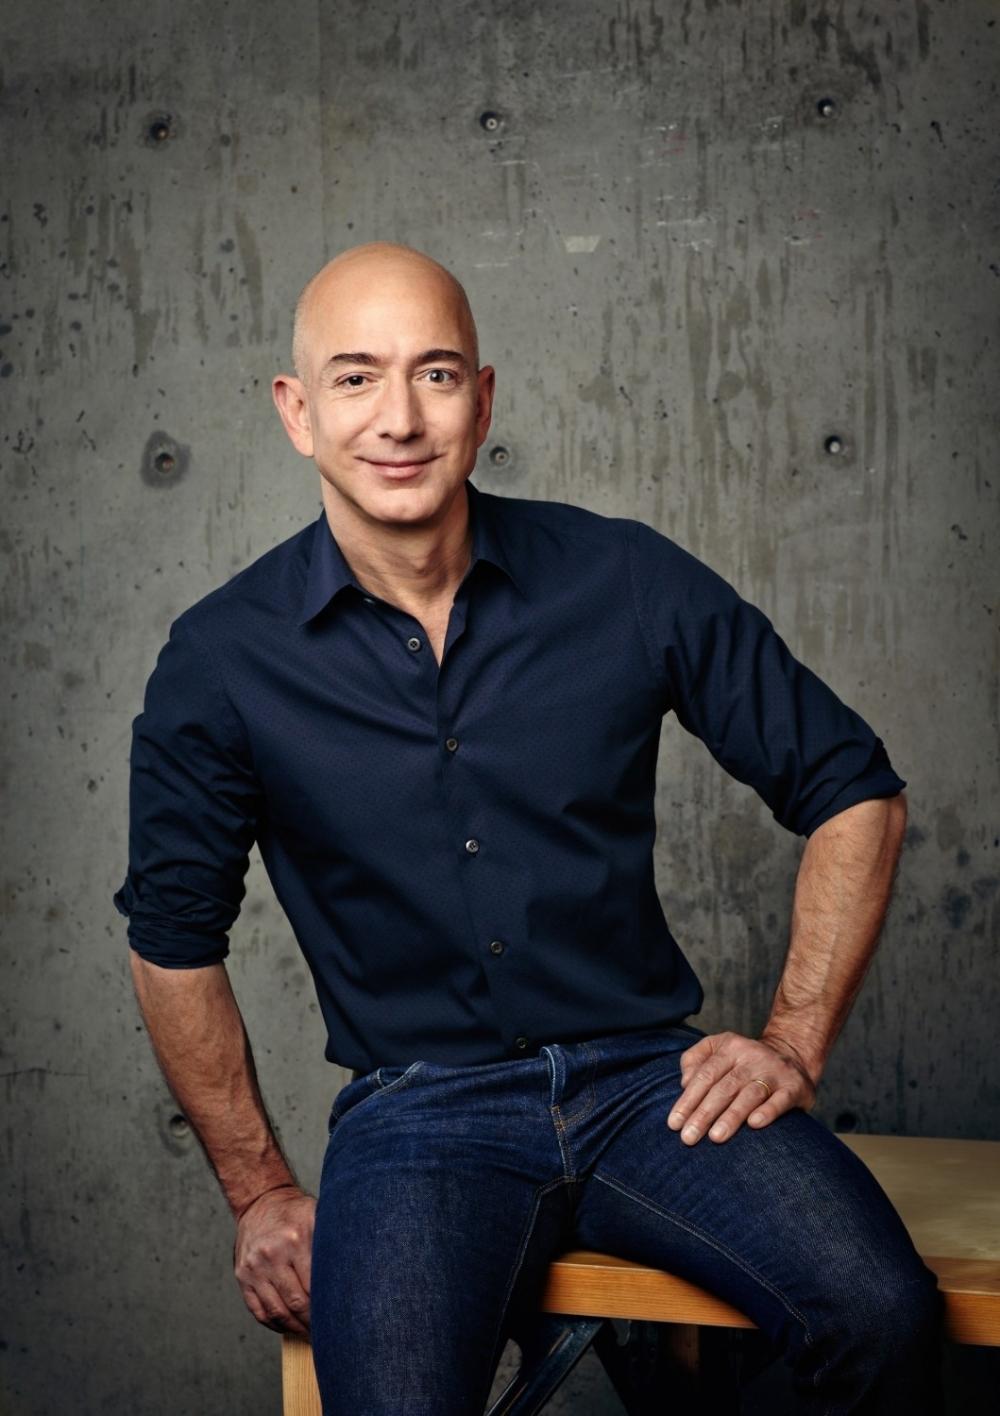 The Weekend Leader - Jeff Bezos to fly beyond Karman line on Tuesday